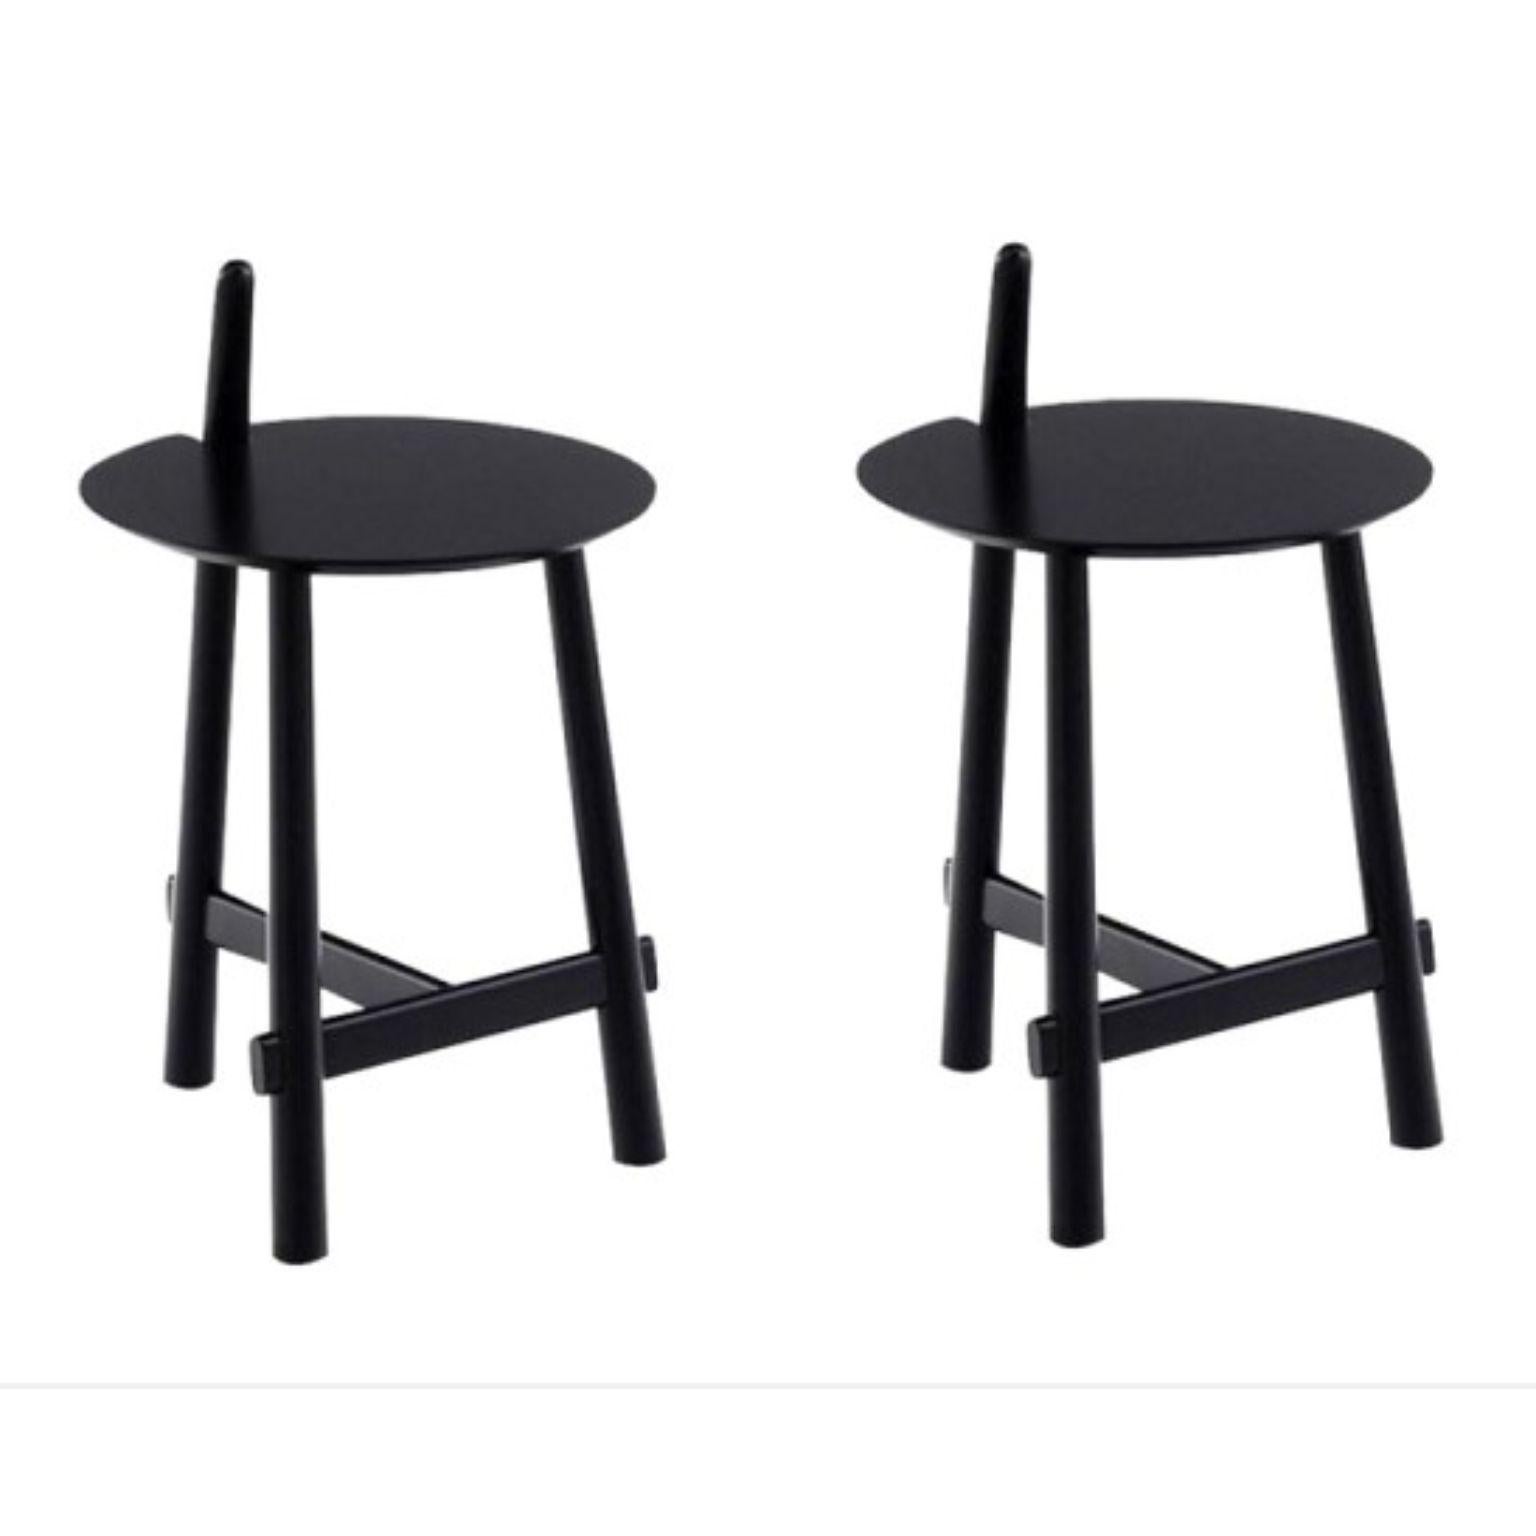 Set of 2 Black Altay side tables by Patricia Urquiola
Materials: Base in solid natural beech or black lacquered. Roundtop in white, black or coral lacquered medium
Technique: Lacquered and black stained or natural wood. 
Dimensions: Diameter 40 x